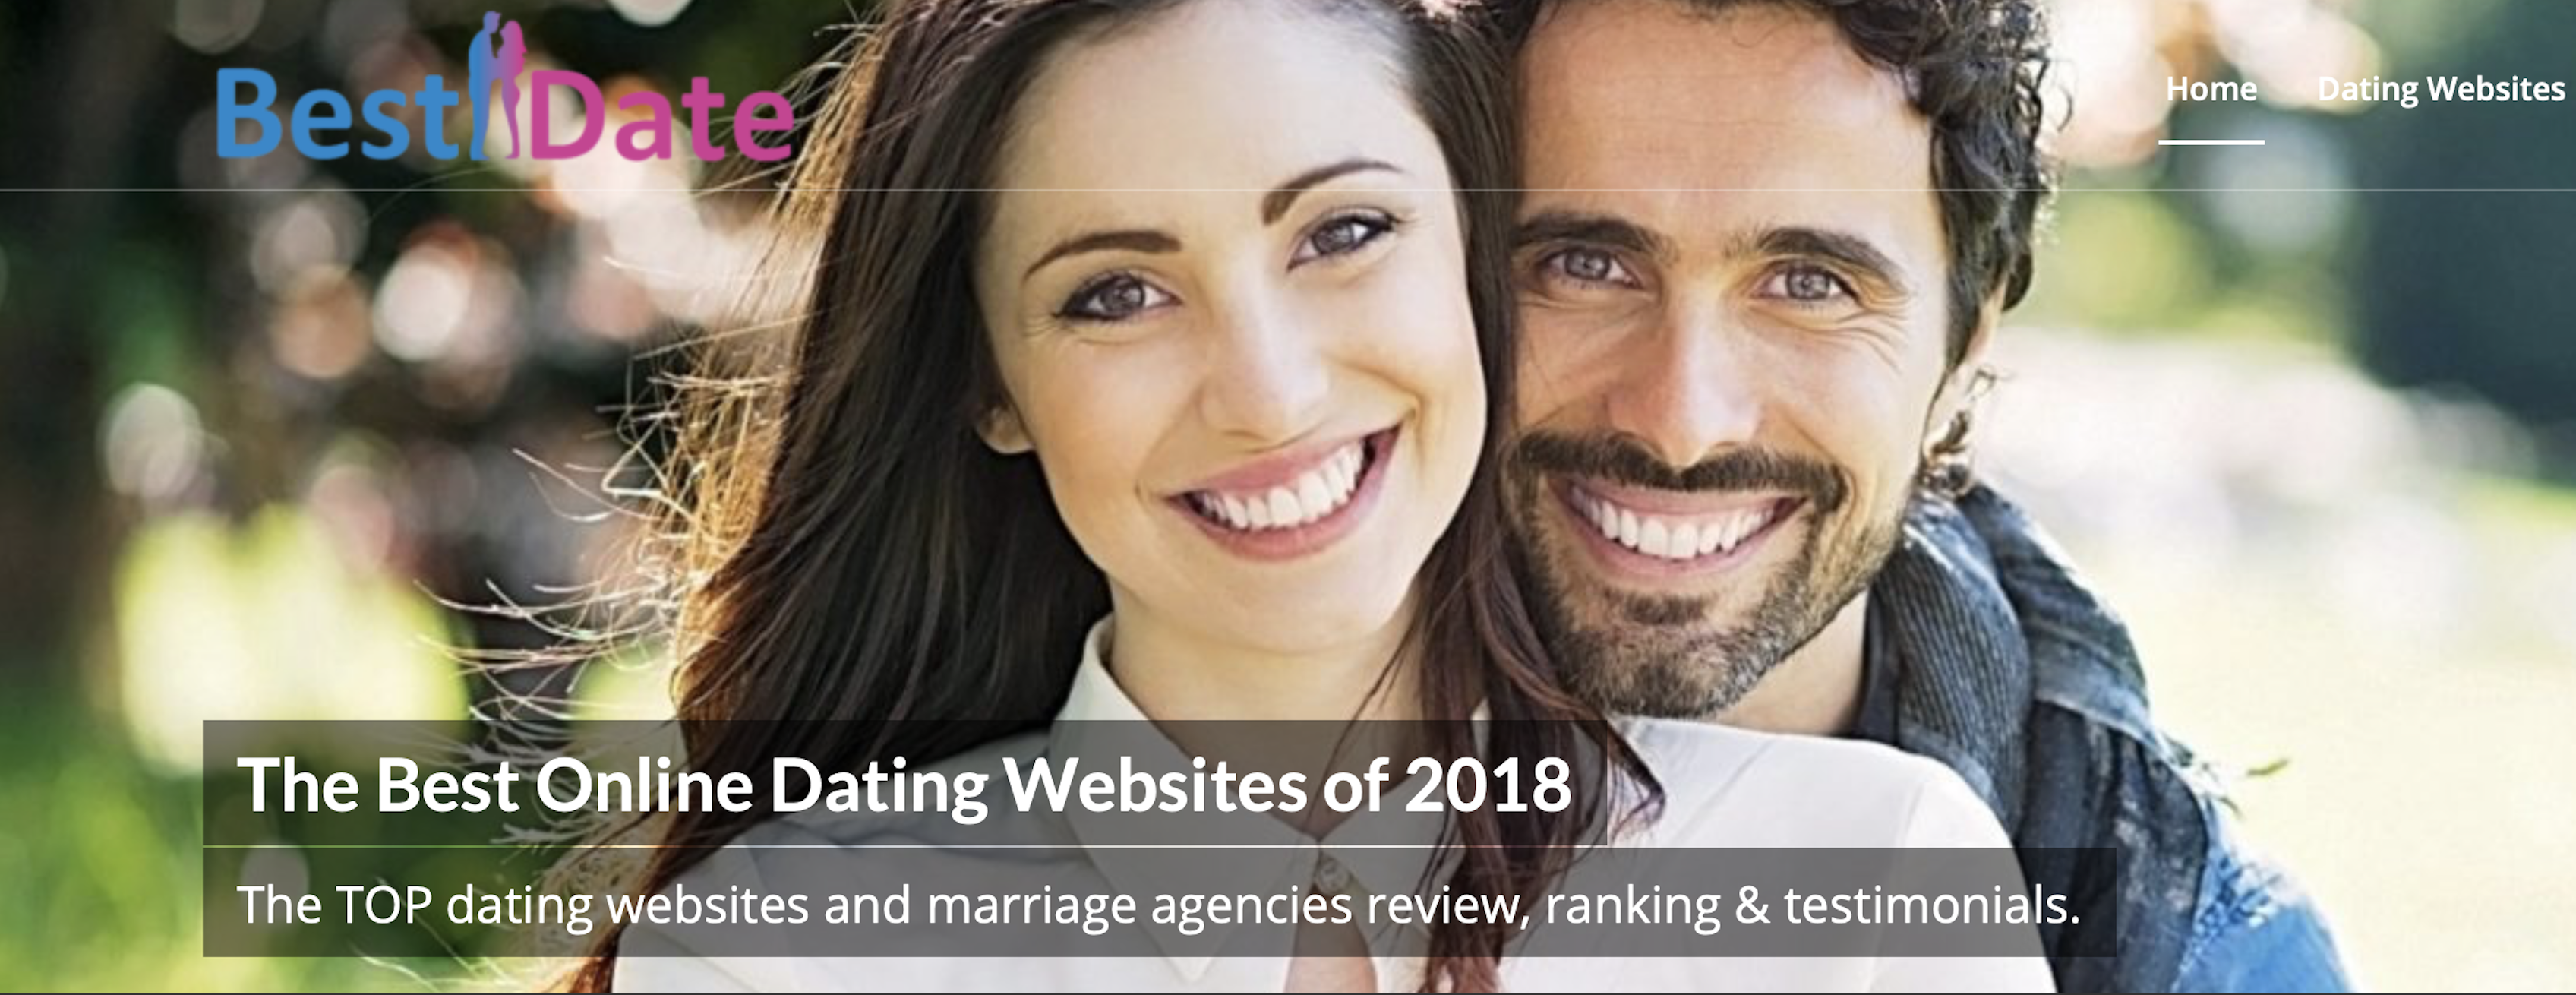 Dating site reviews